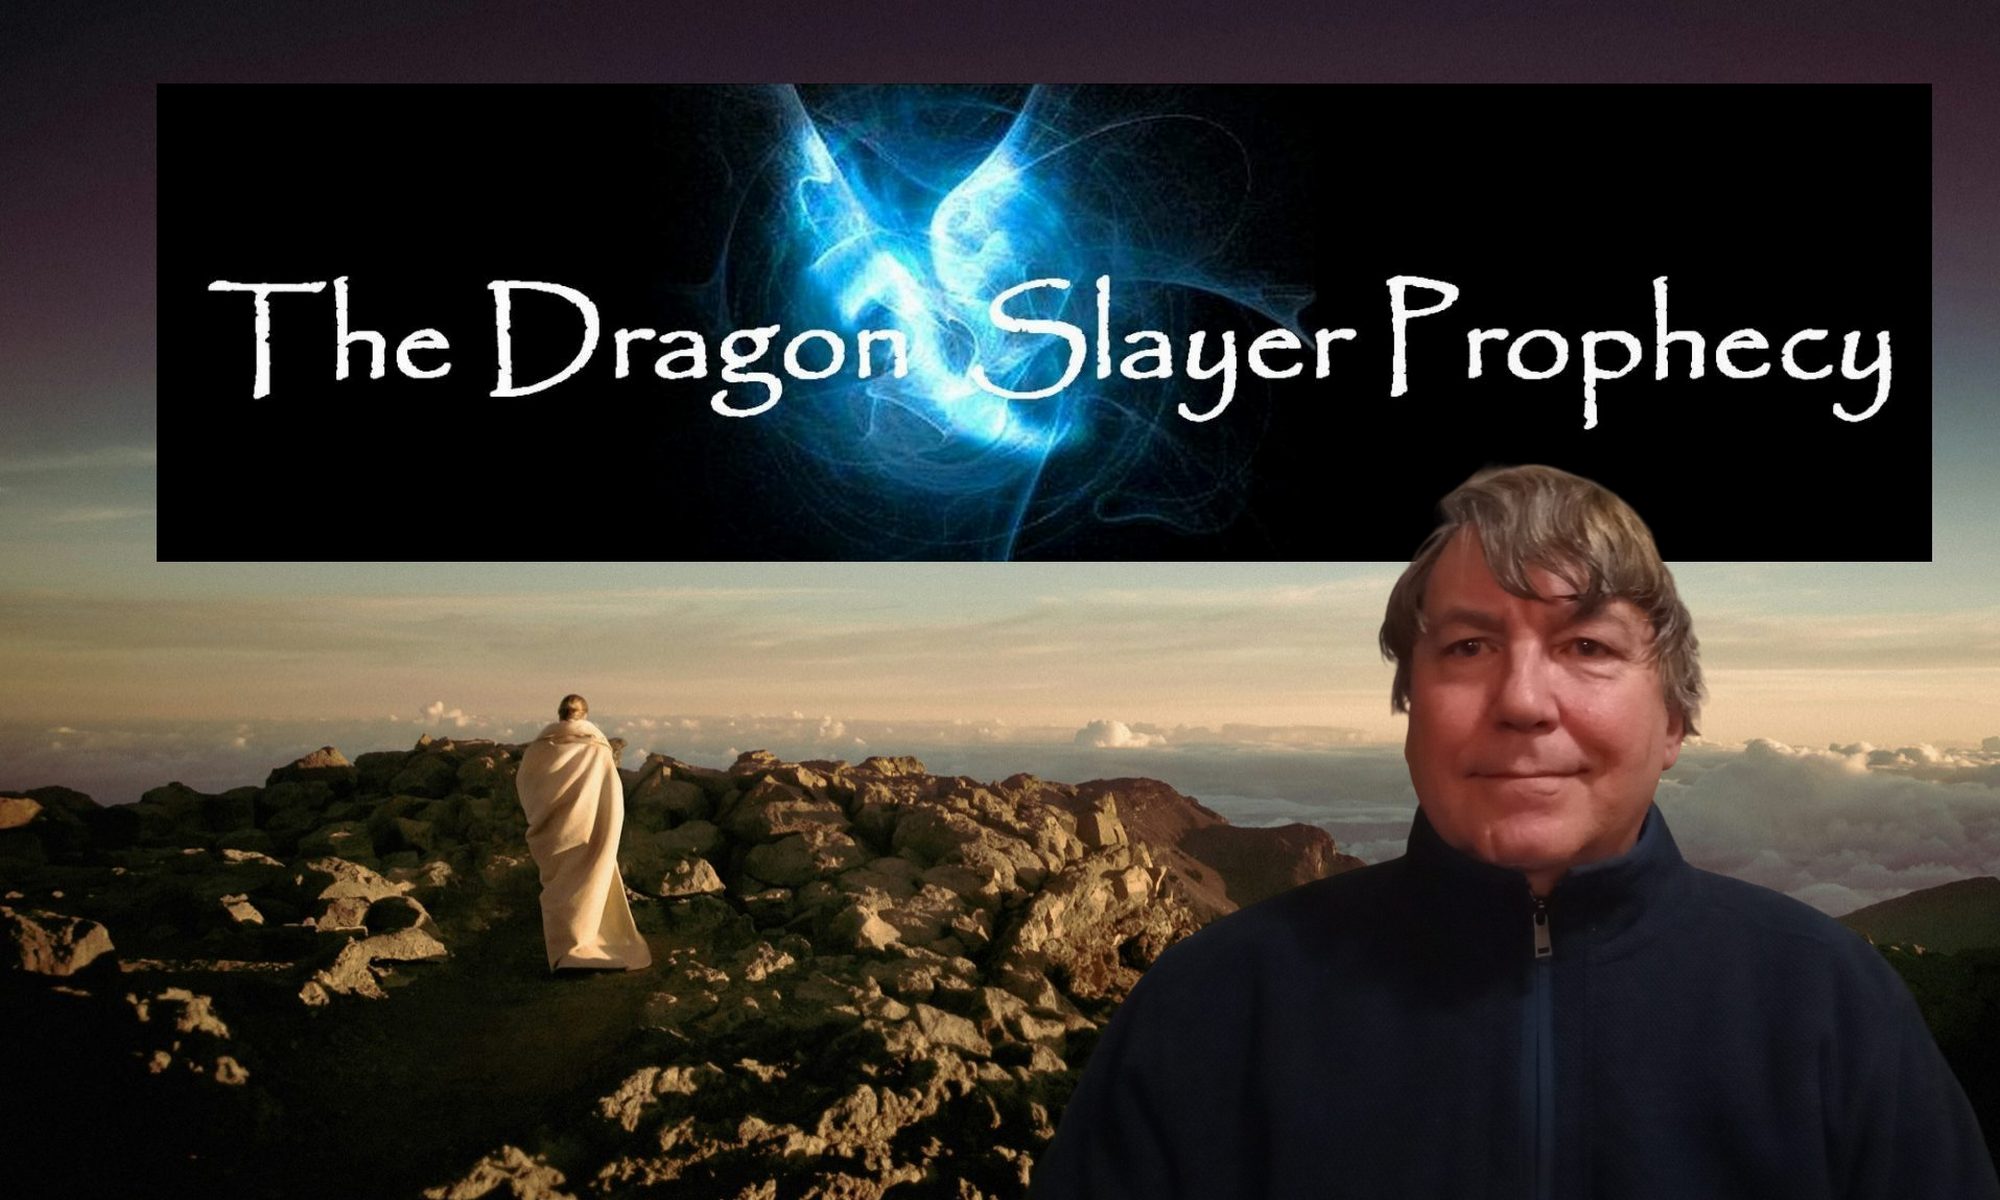 The Dragon Slayer Prophecy Film by William Eastwood